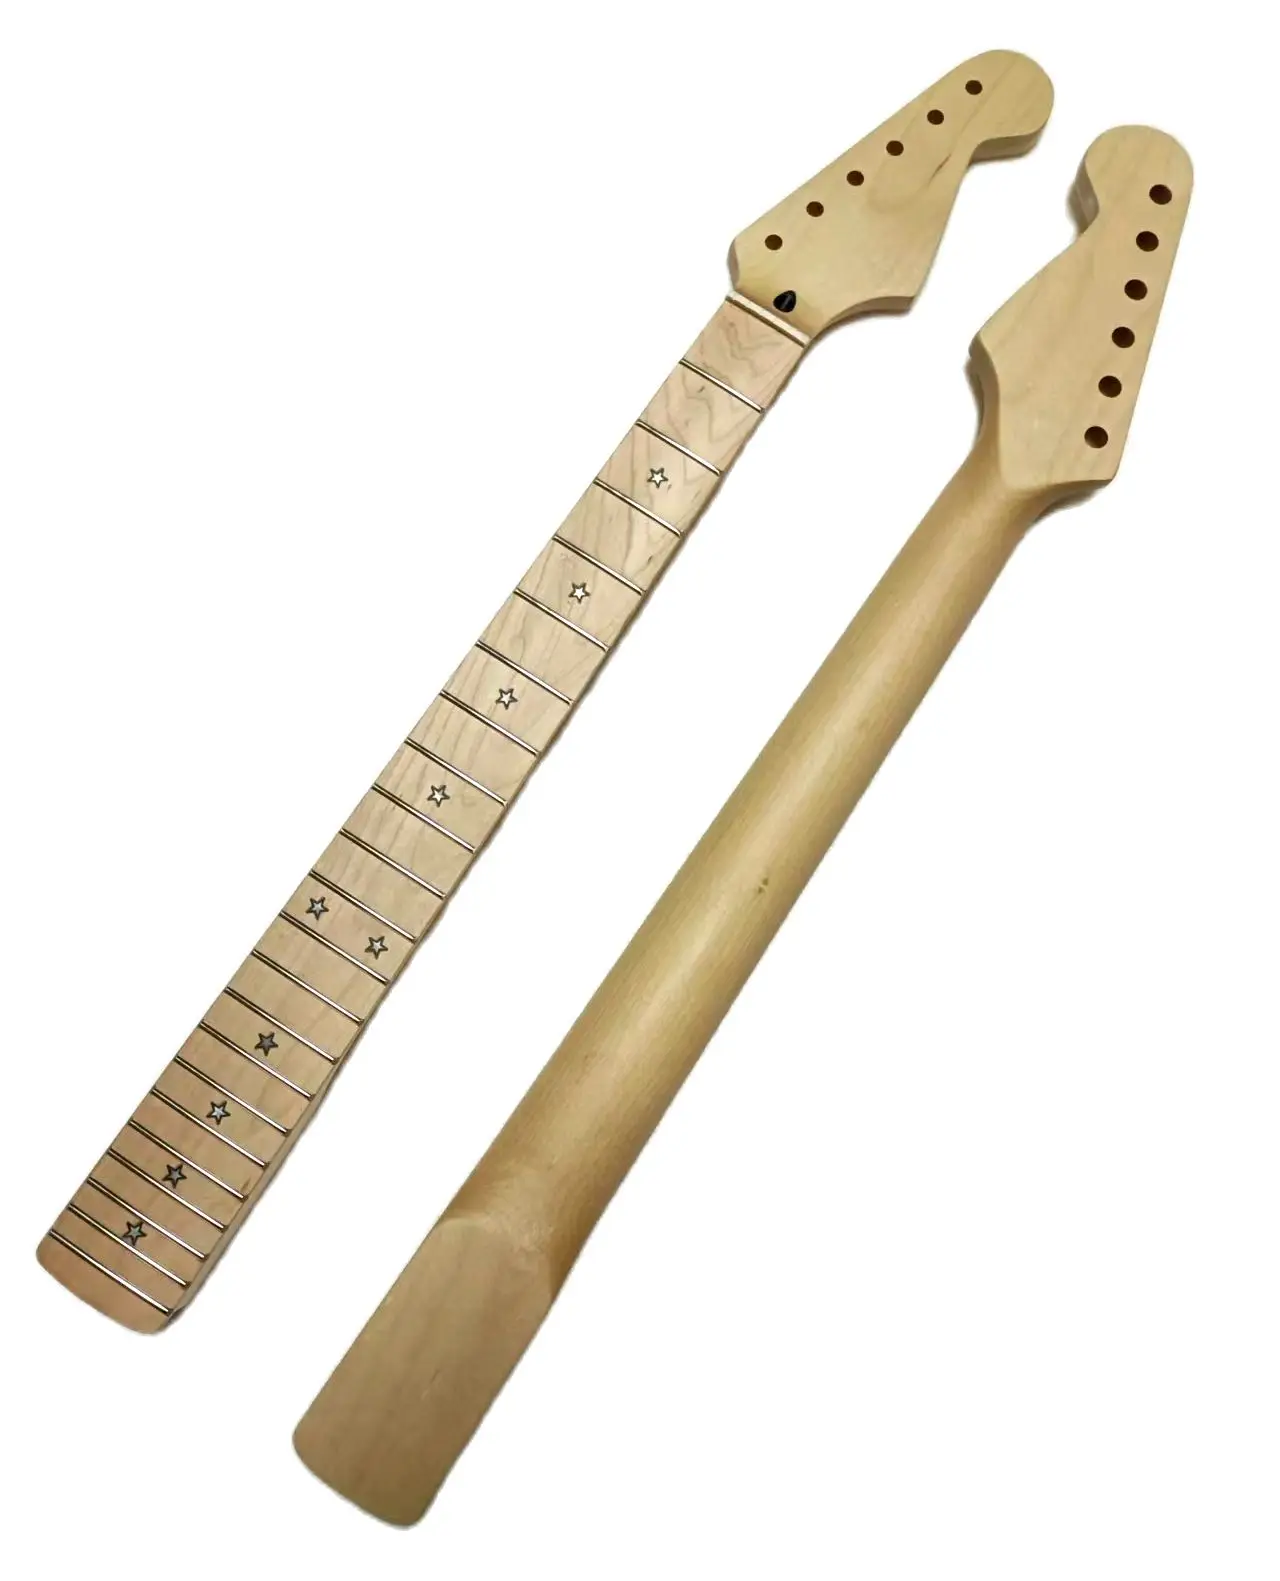 Enlarge 22-Fret ST Style Electric Guitar Neck Little Star Inlay Canadian Maple Wood Color(1pc,Free Logo Service)